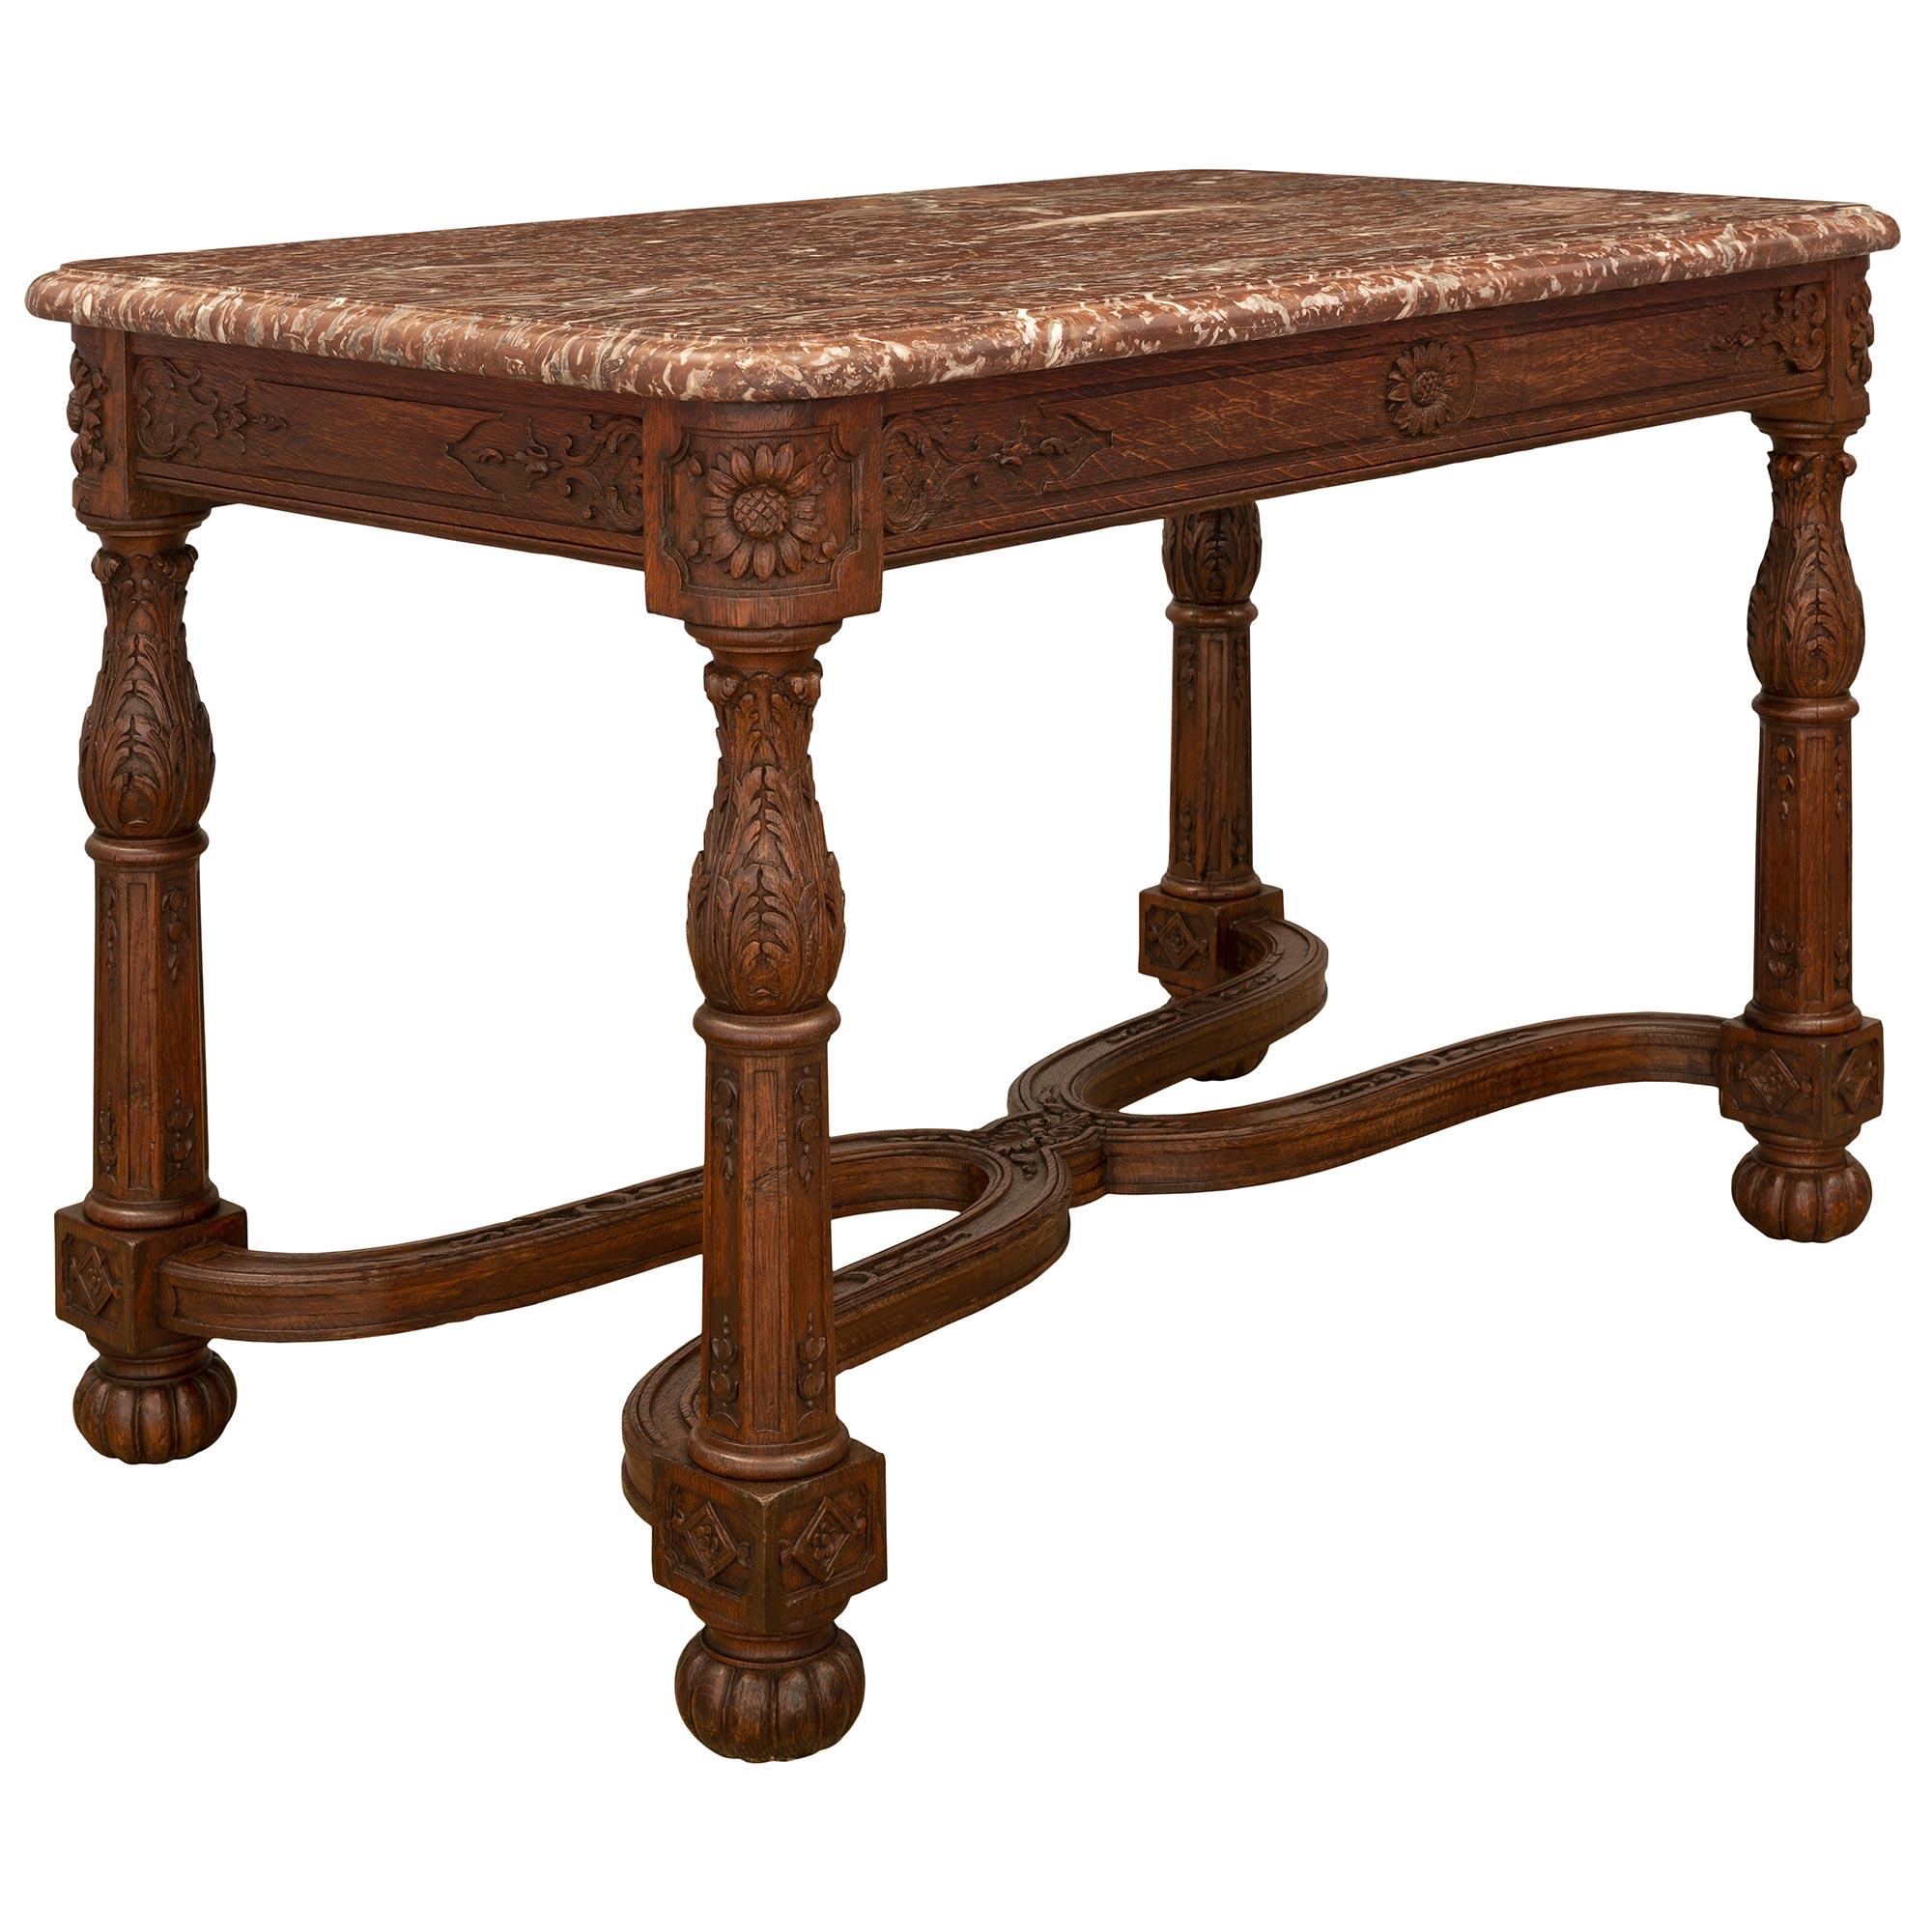 French 18th Century Louis XVI Period Country French Provençal Oak Center Table In Good Condition For Sale In West Palm Beach, FL